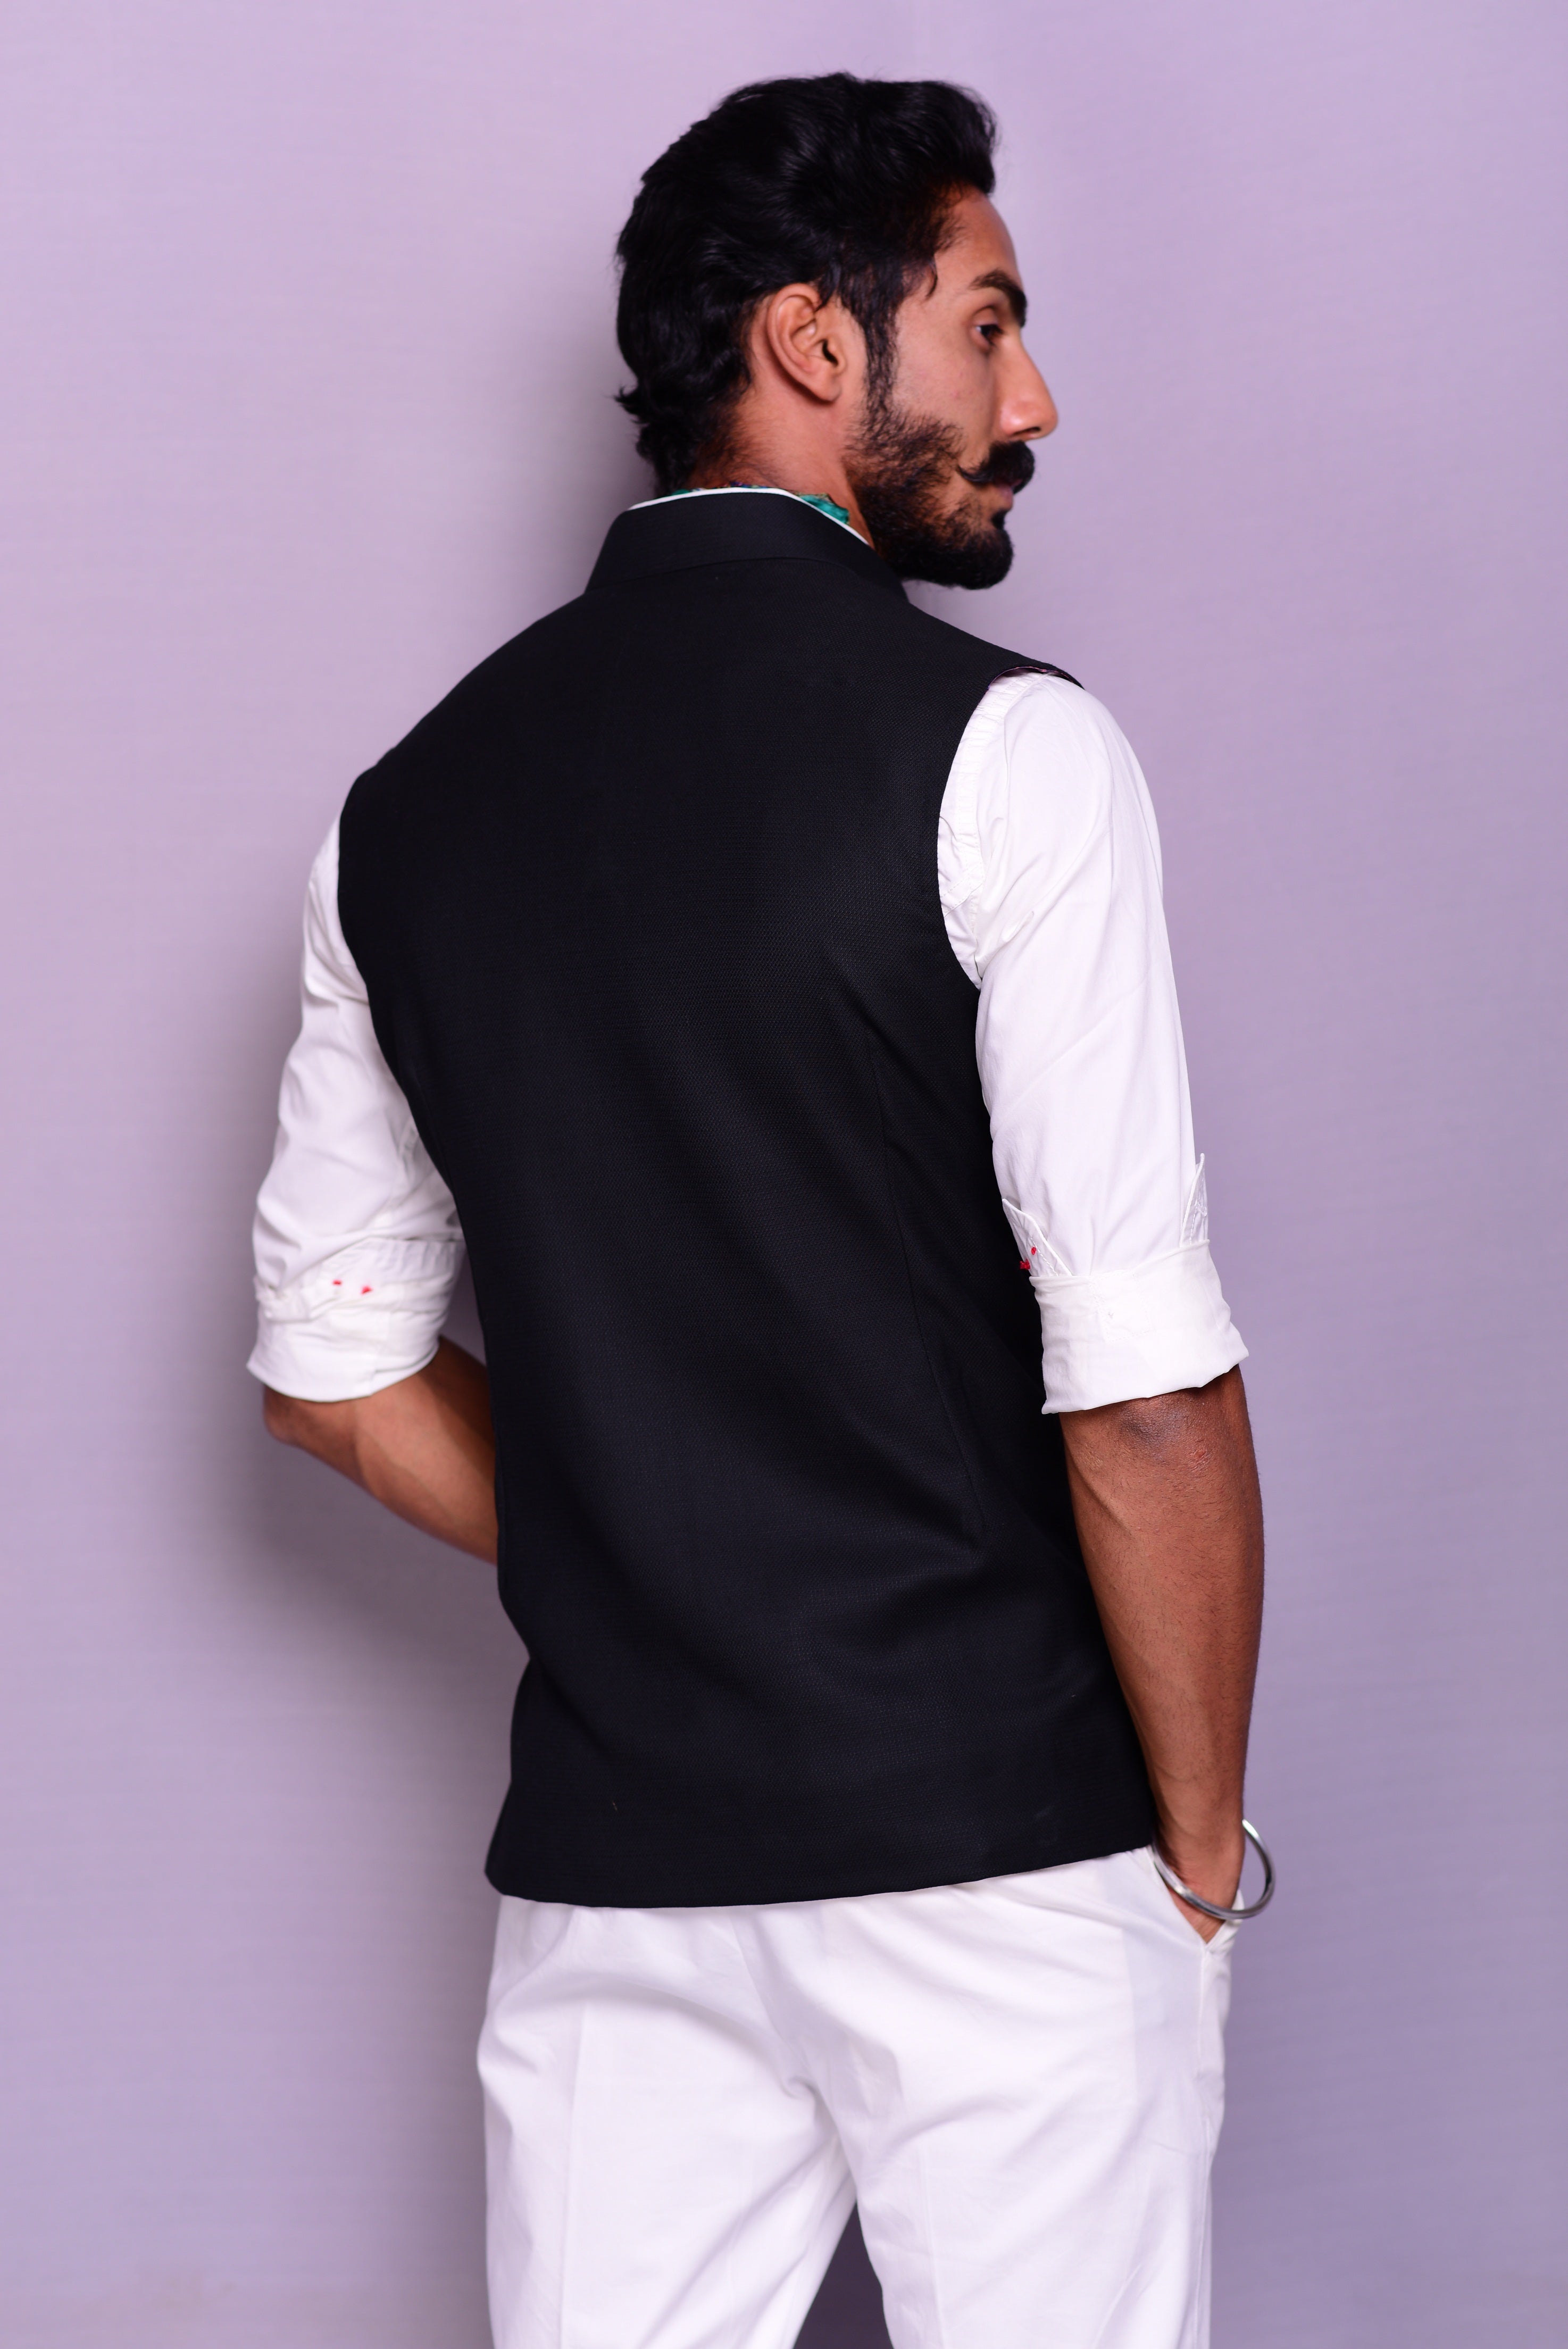 Pin by Crux_Creator on formal | Indian men fashion, Mens outfits, Clothes